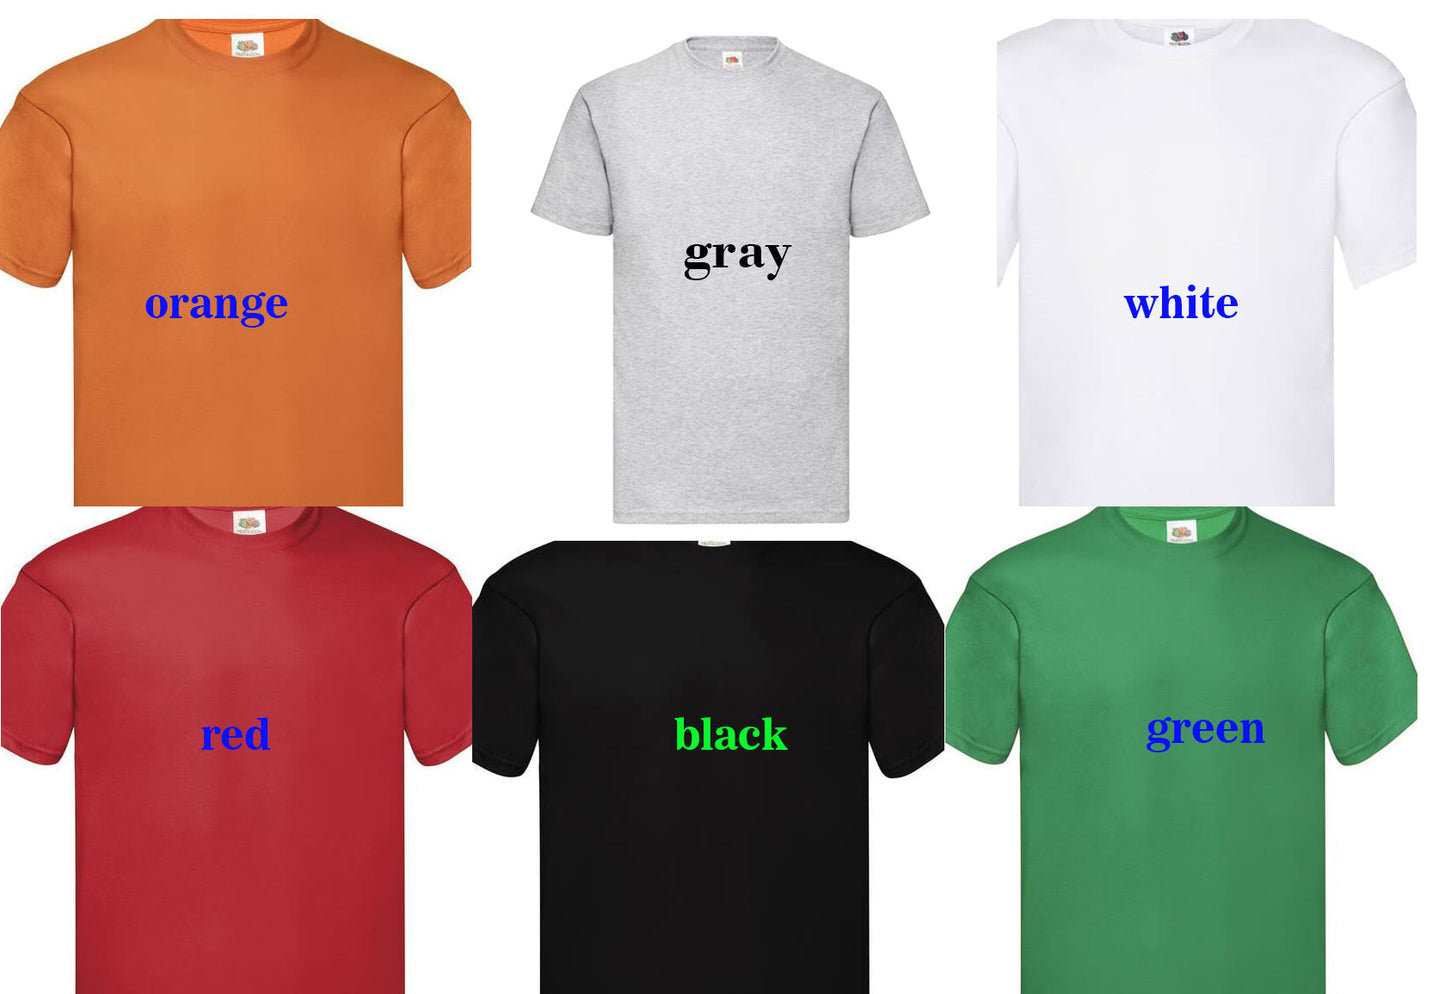 066. CRAZY FACE, Personalized T-Shirt, Custom Text, Make Your Own Shirt, Custom Tee